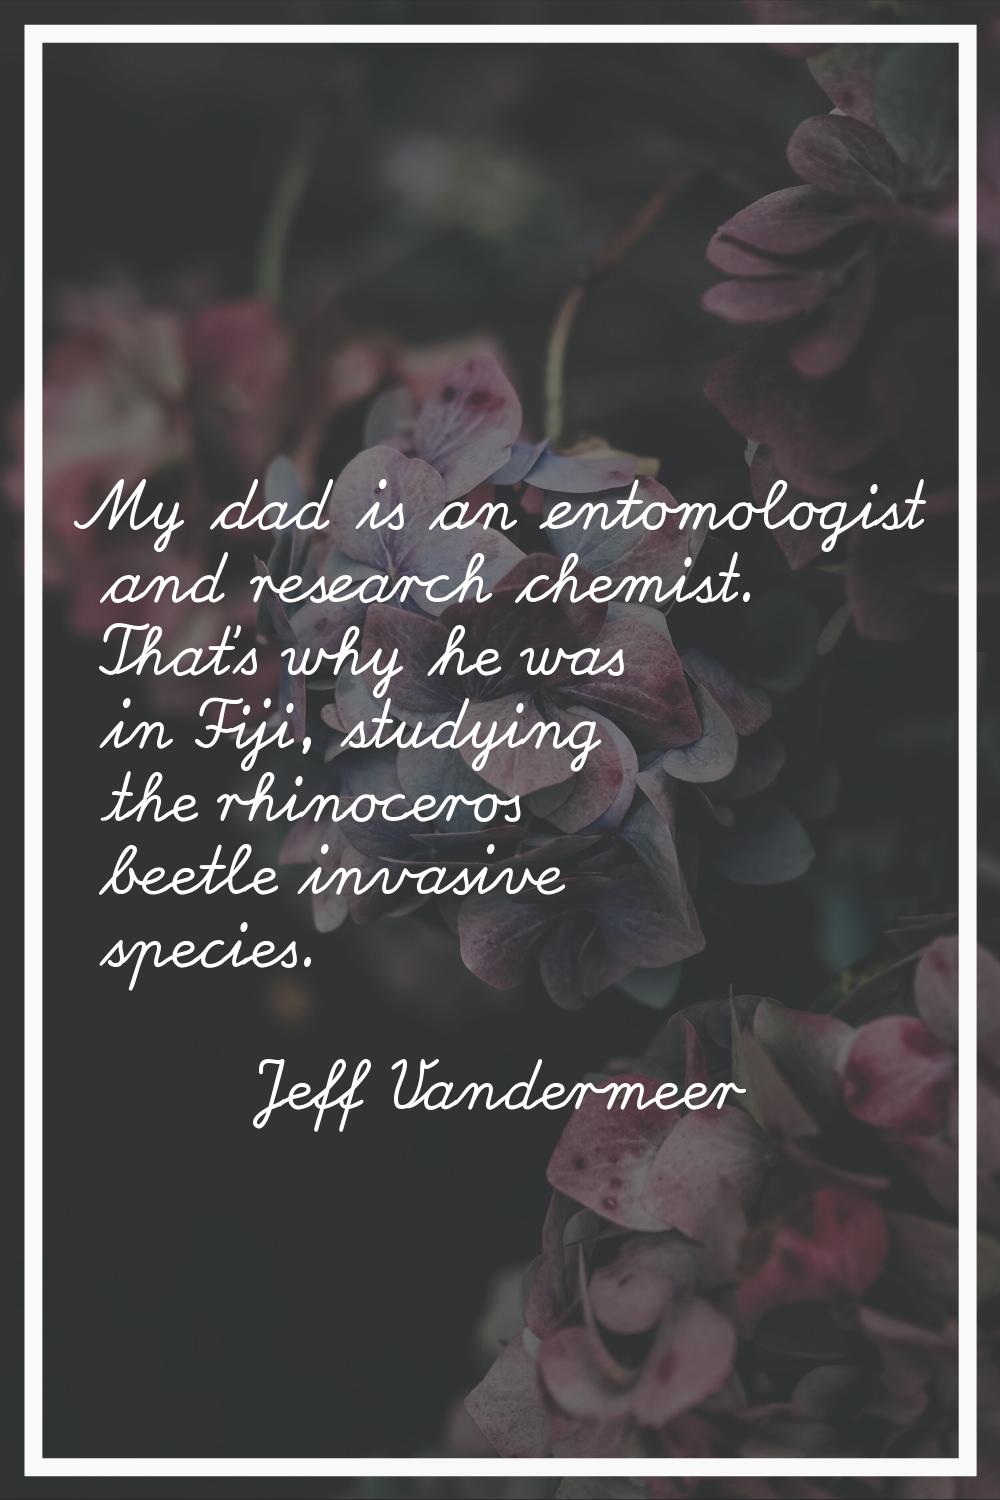 My dad is an entomologist and research chemist. That's why he was in Fiji, studying the rhinoceros 